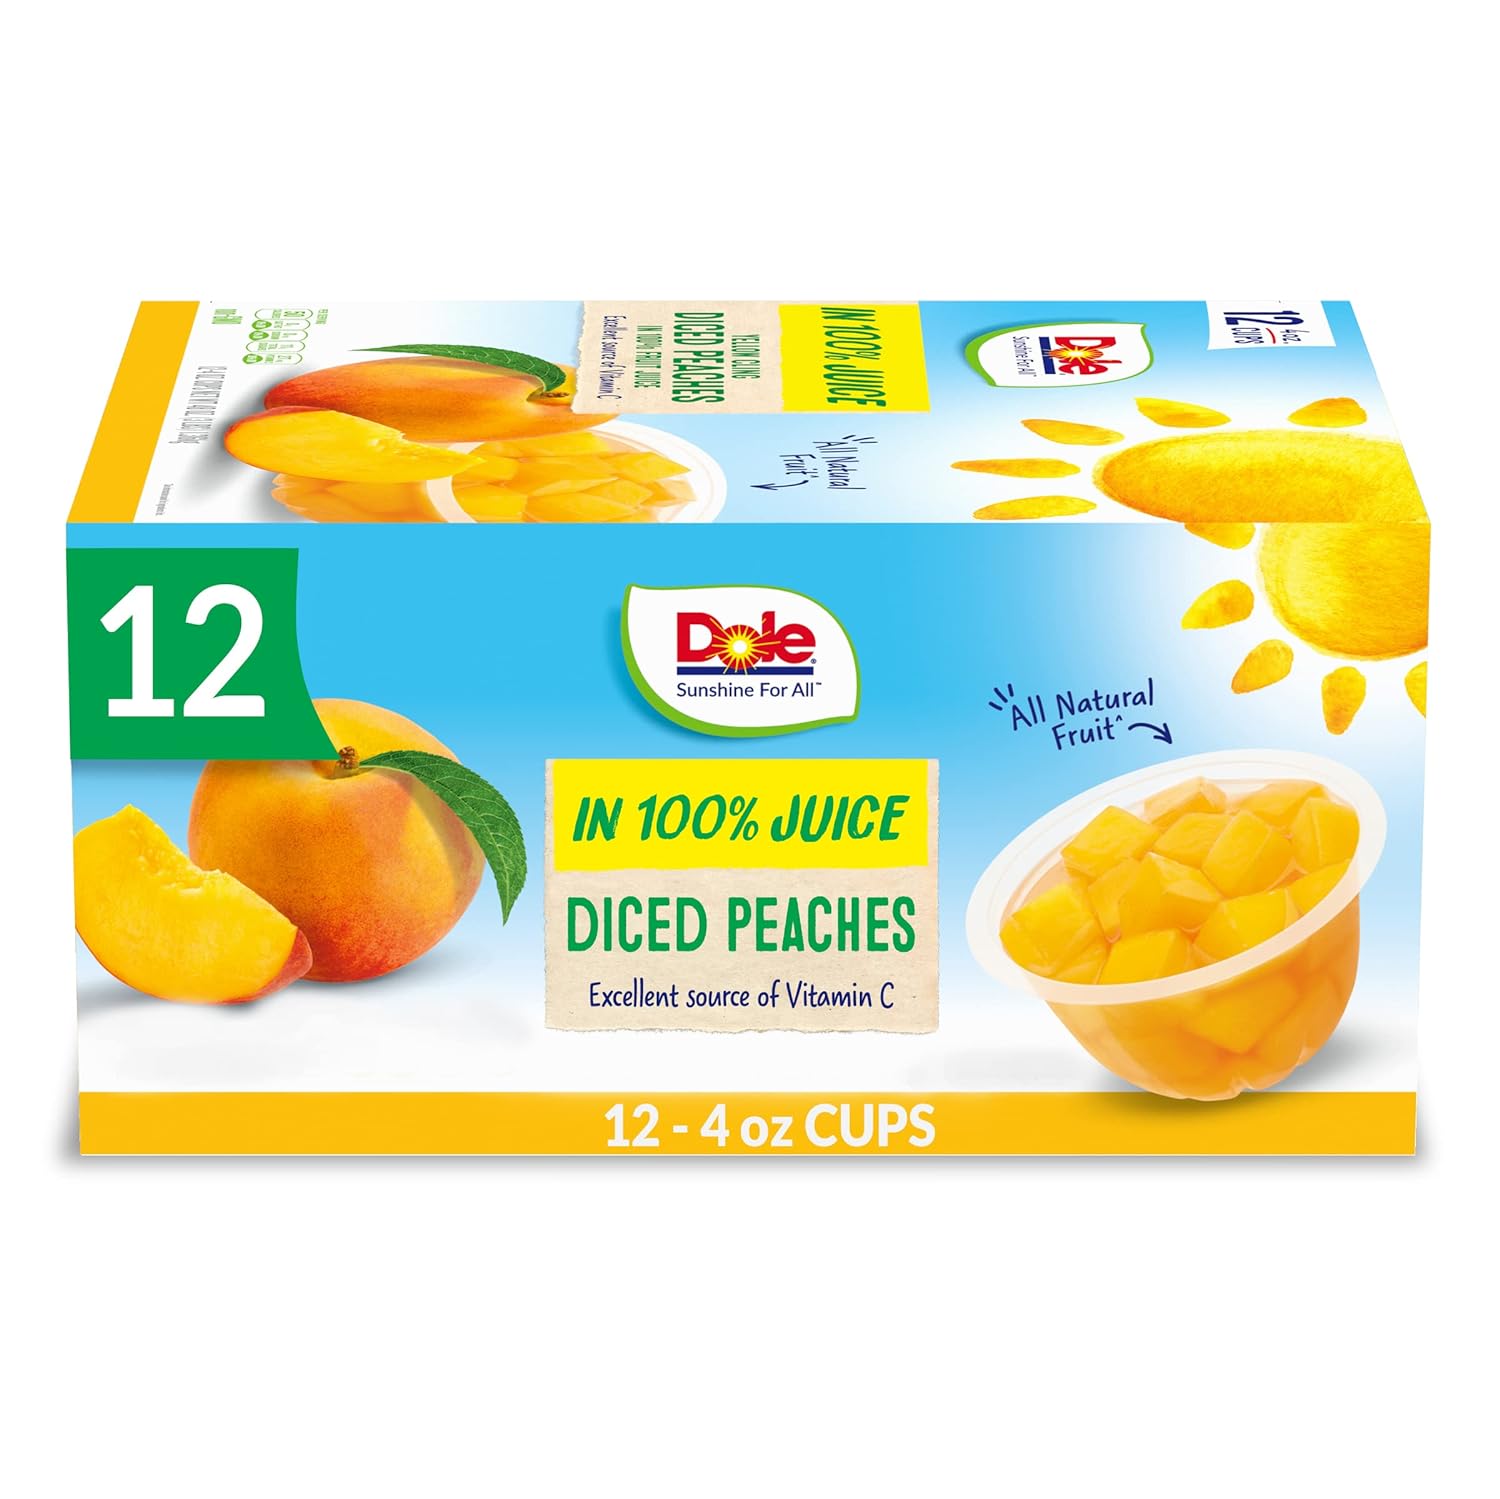 Dole Fruit Bowls Diced Peaches in 100% Juice Snacks, 4oz 12 Total Cups, Gluten & Dairy Free, Bulk Lunch Snacks for Kids & Adults